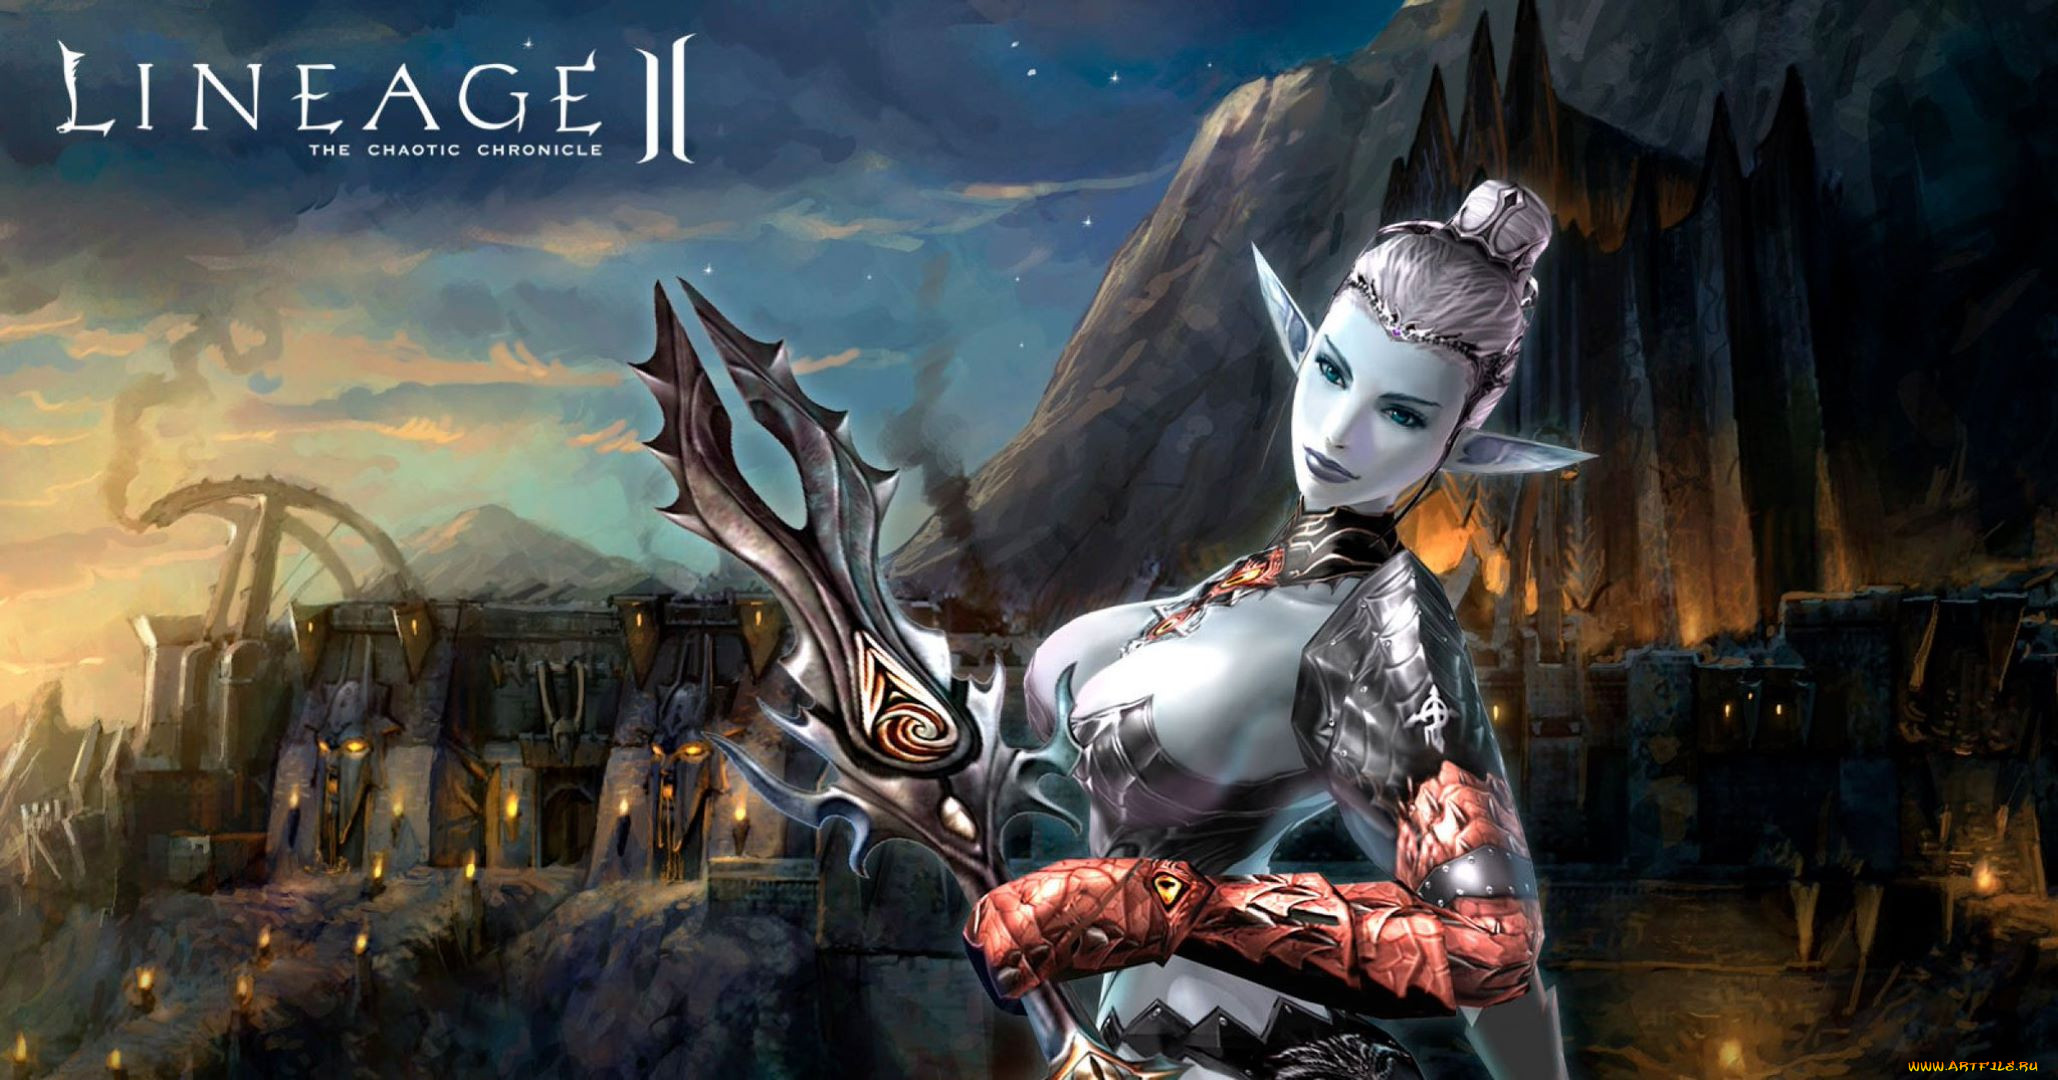  , lineage ii,  the chaotic chronicle, , , , 